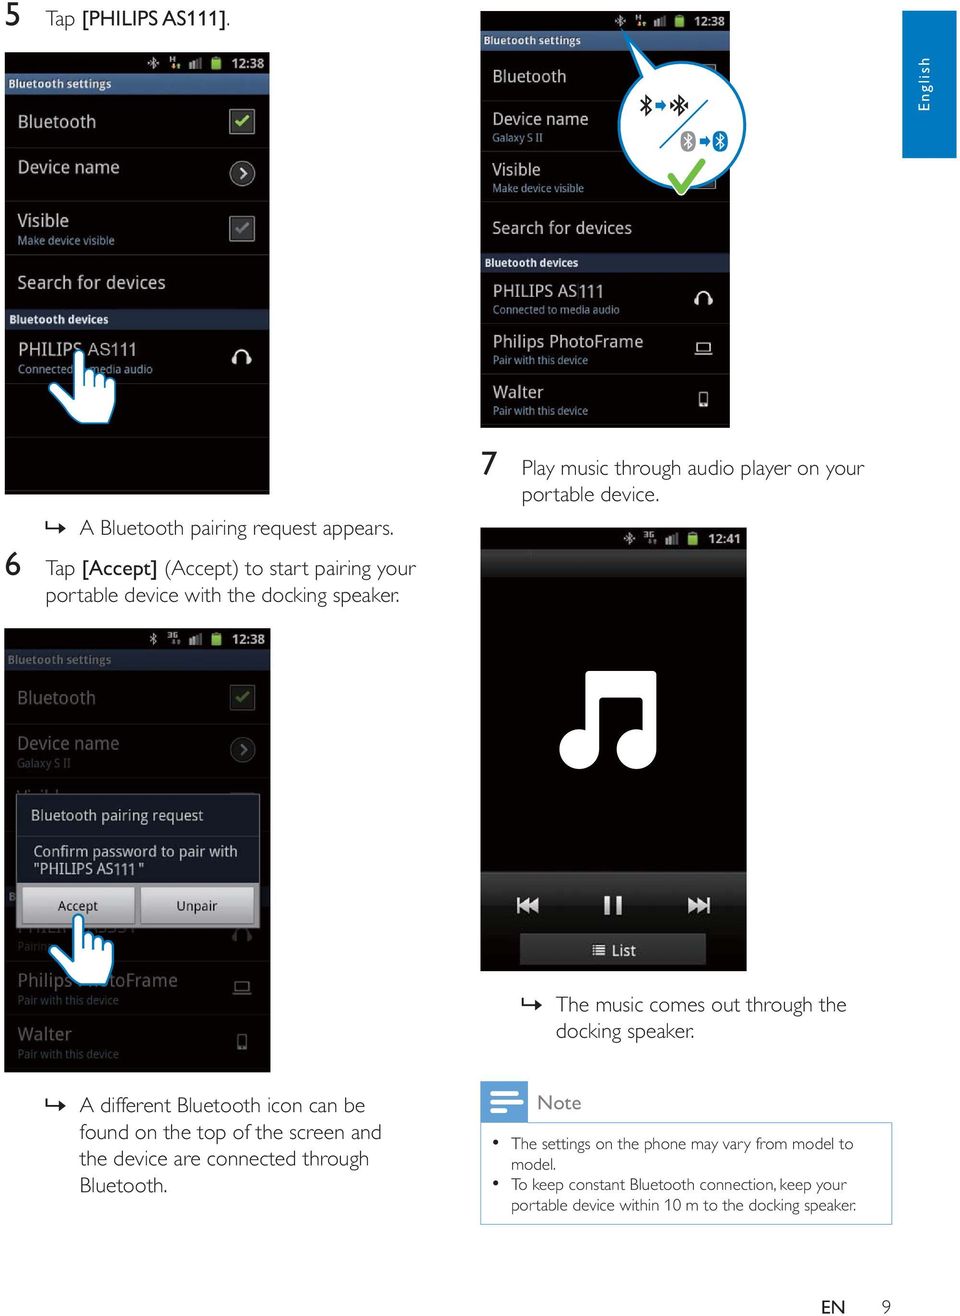 » A different Bluetooth icon can be found on the top of the screen and the device are connected through Bluetooth.